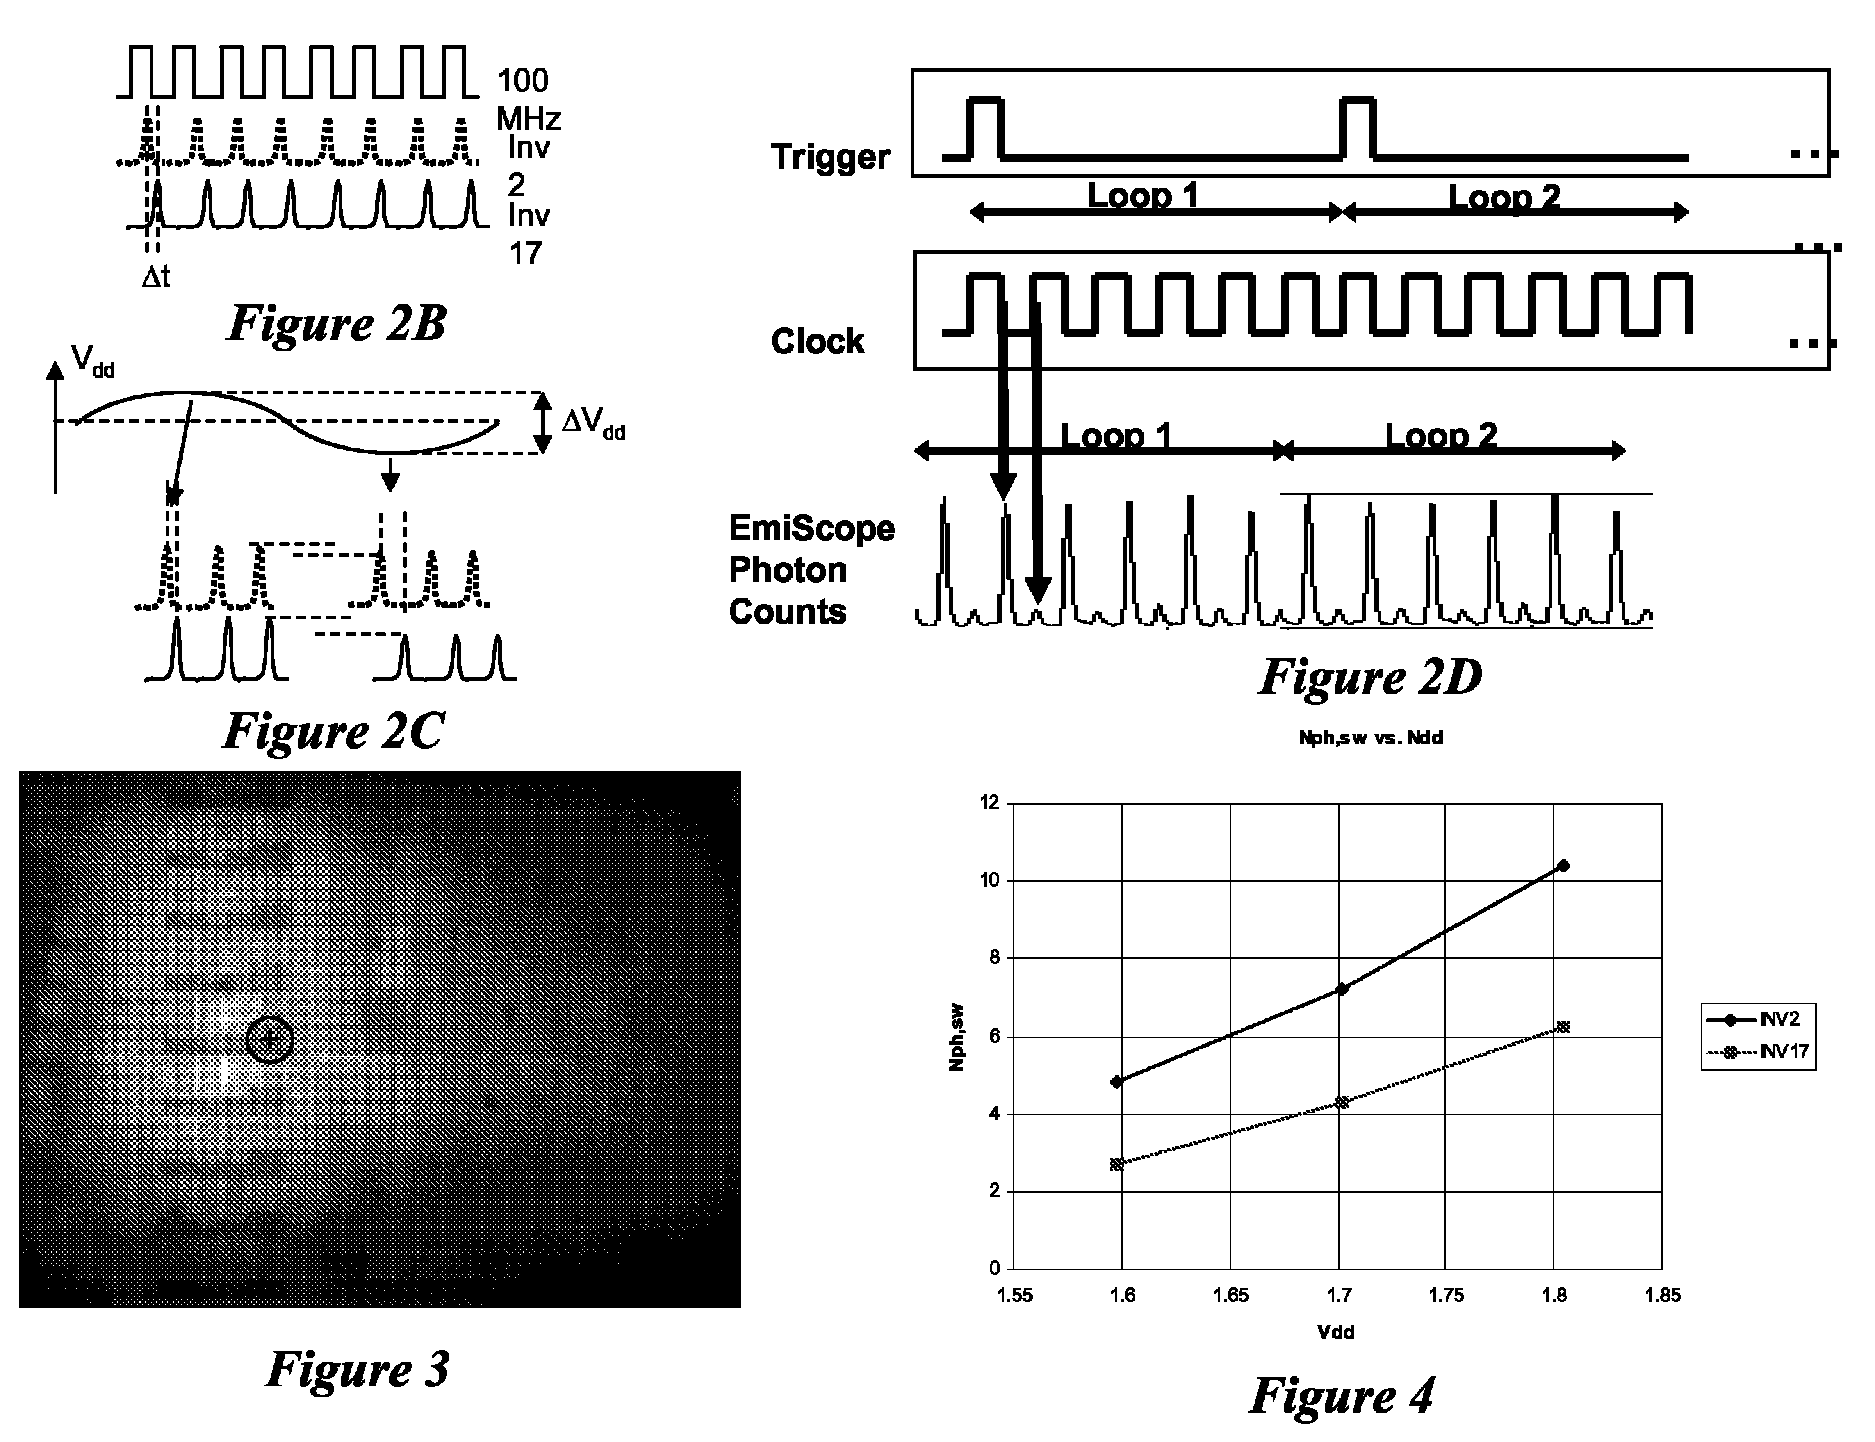 System and method for voltage noise and jitter measurement using time-resolved emission